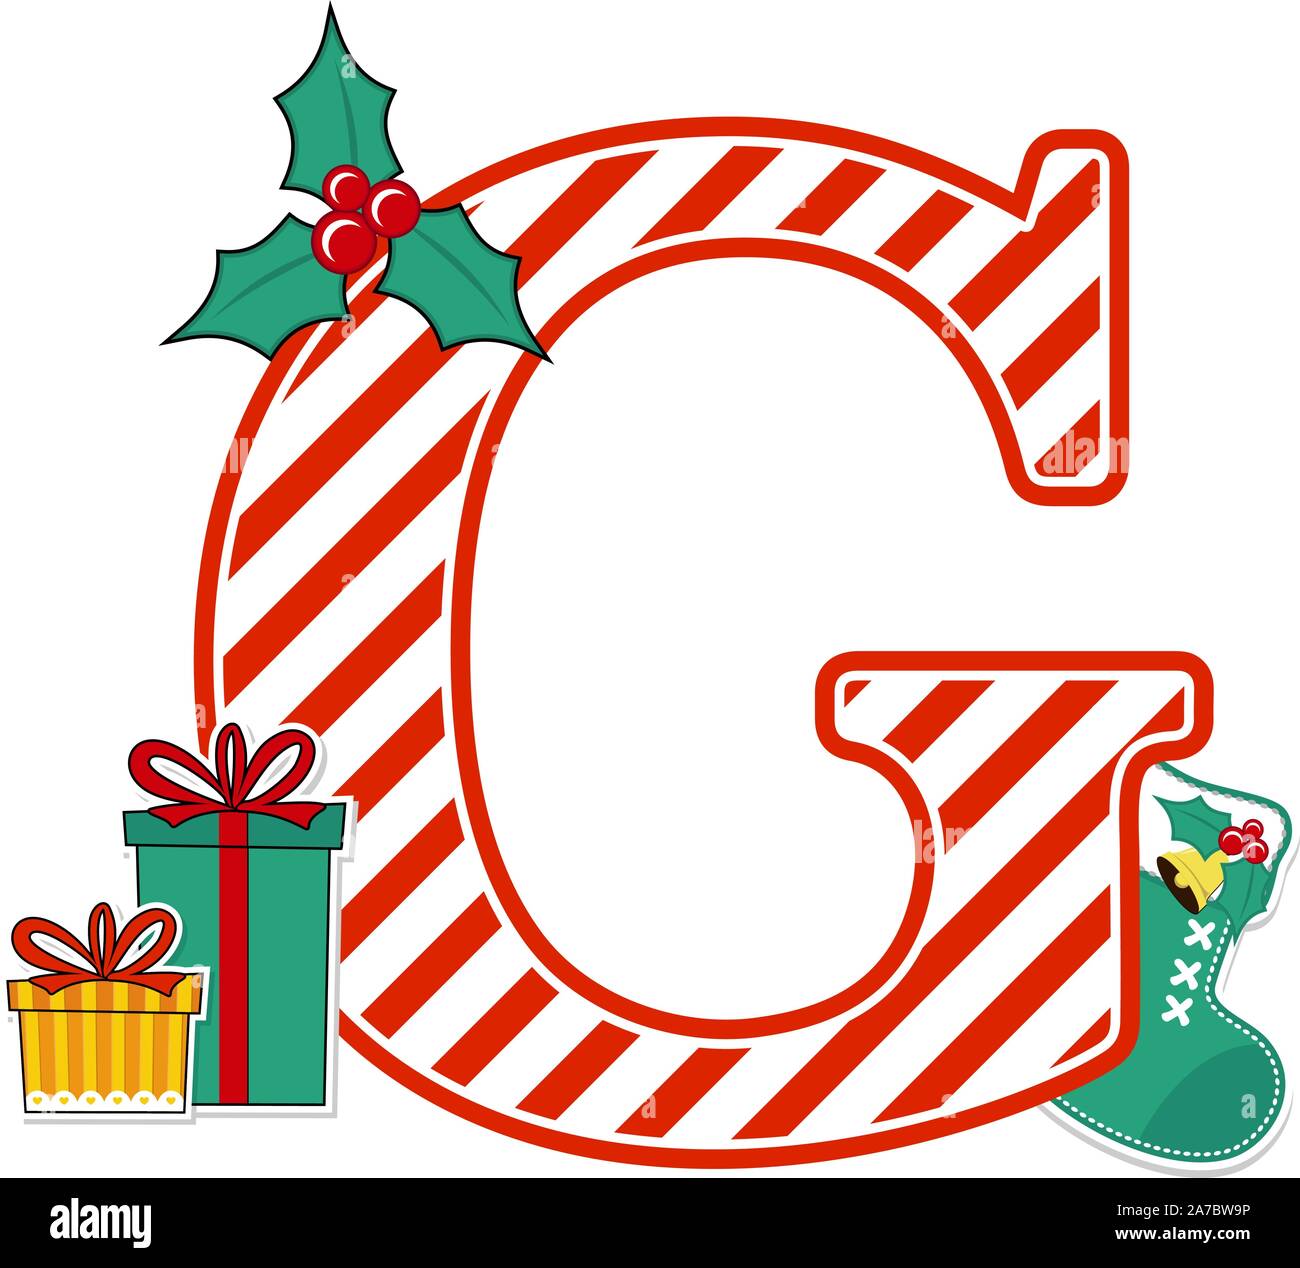 Candy Cane Stripes (Christmas Alphabet Lettering Font) – DIY Projects,  Patterns, Monograms, Designs, Templates